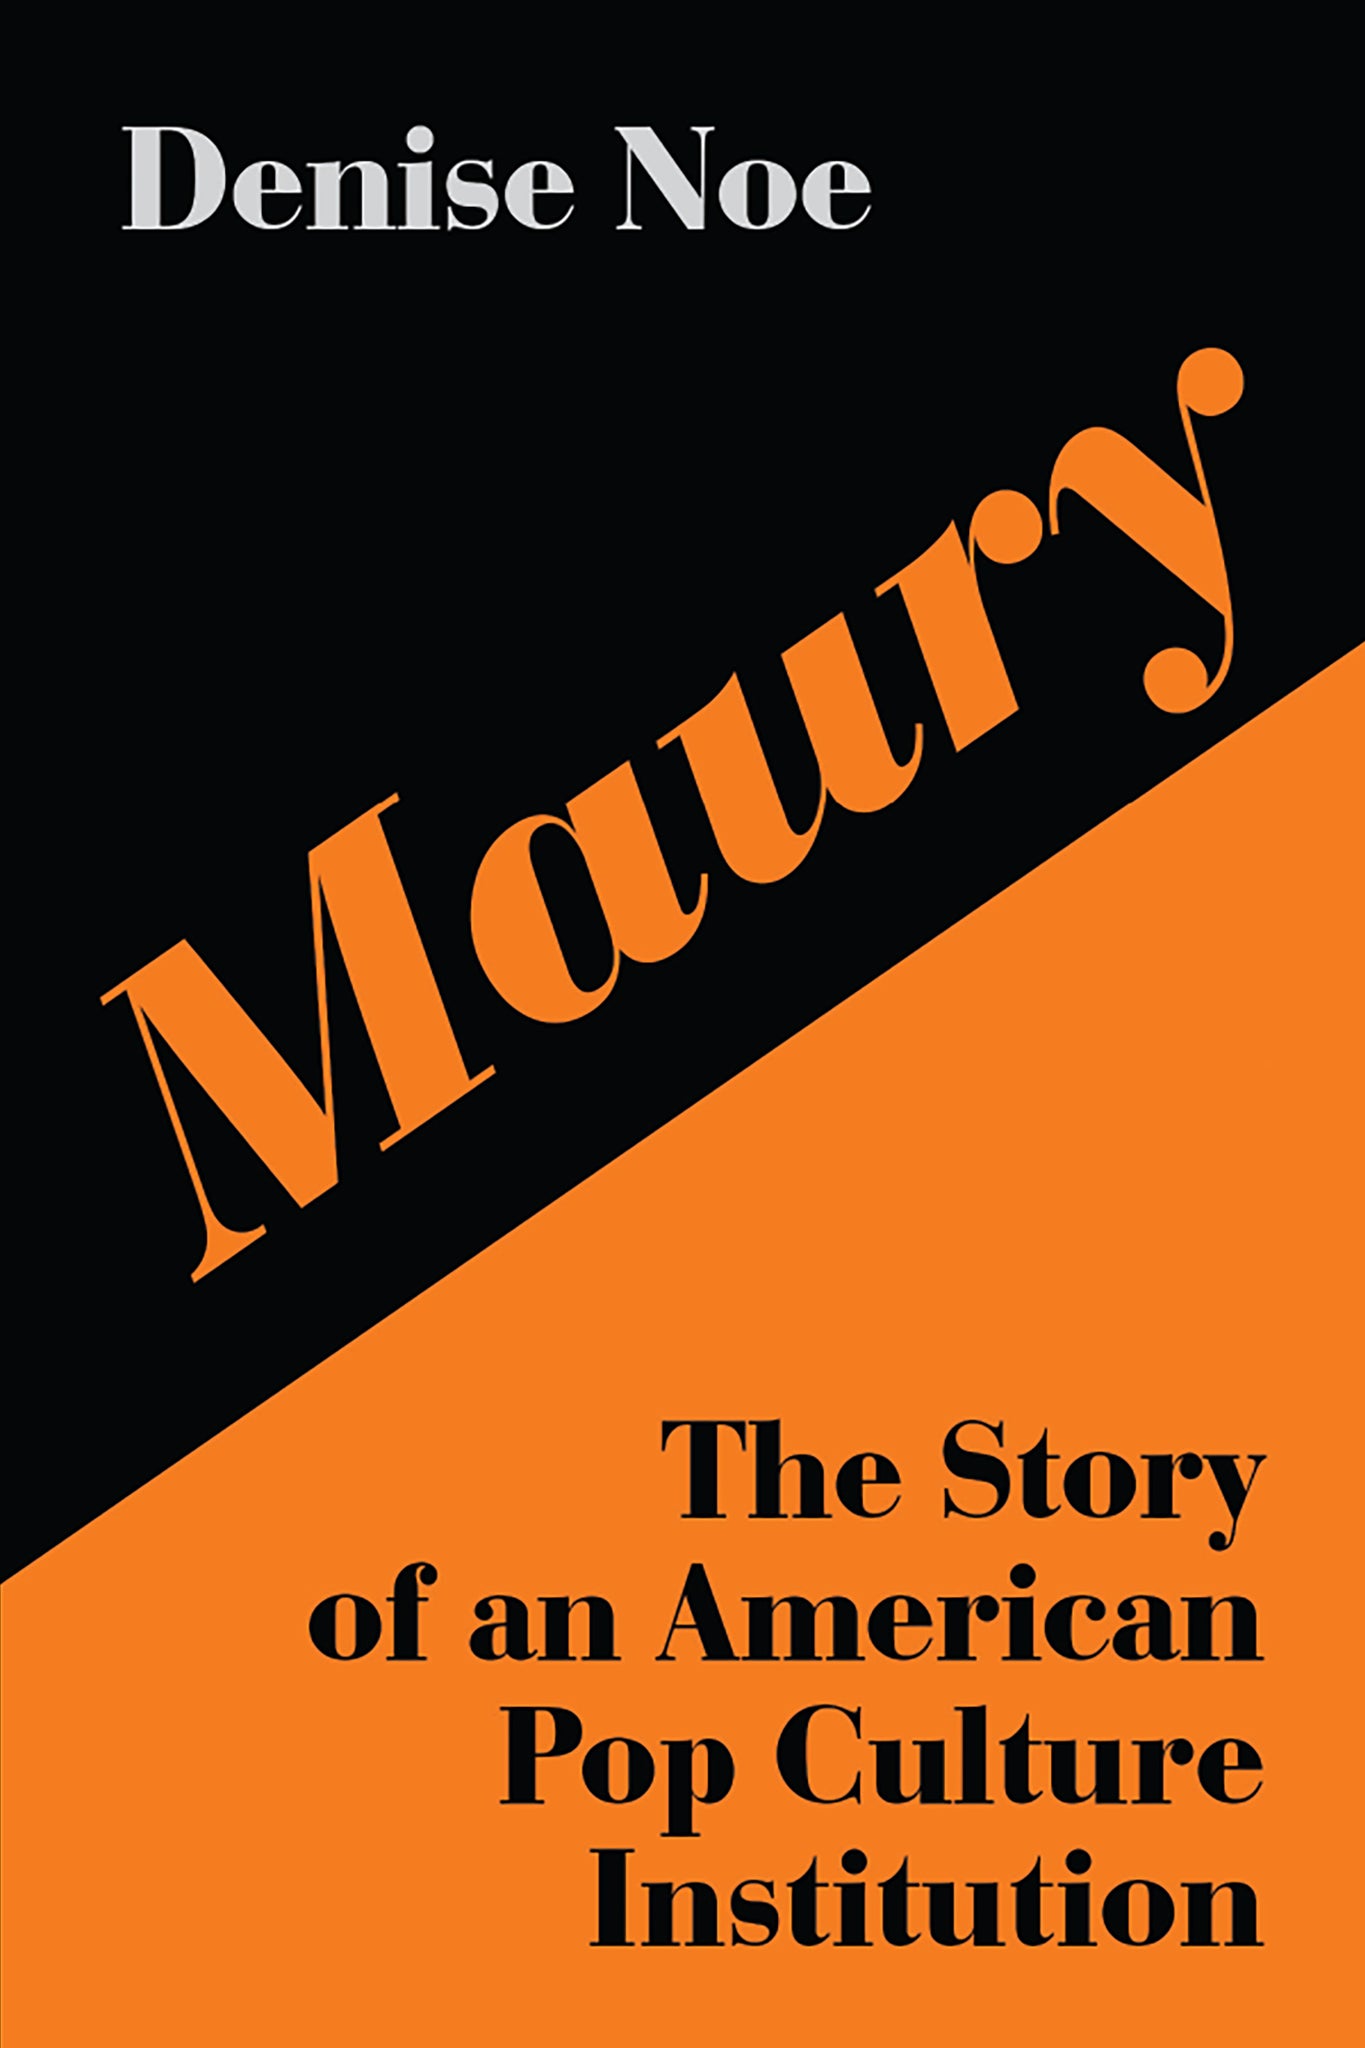 Maury: The Story of an American Pop Culture Institution (paperback)